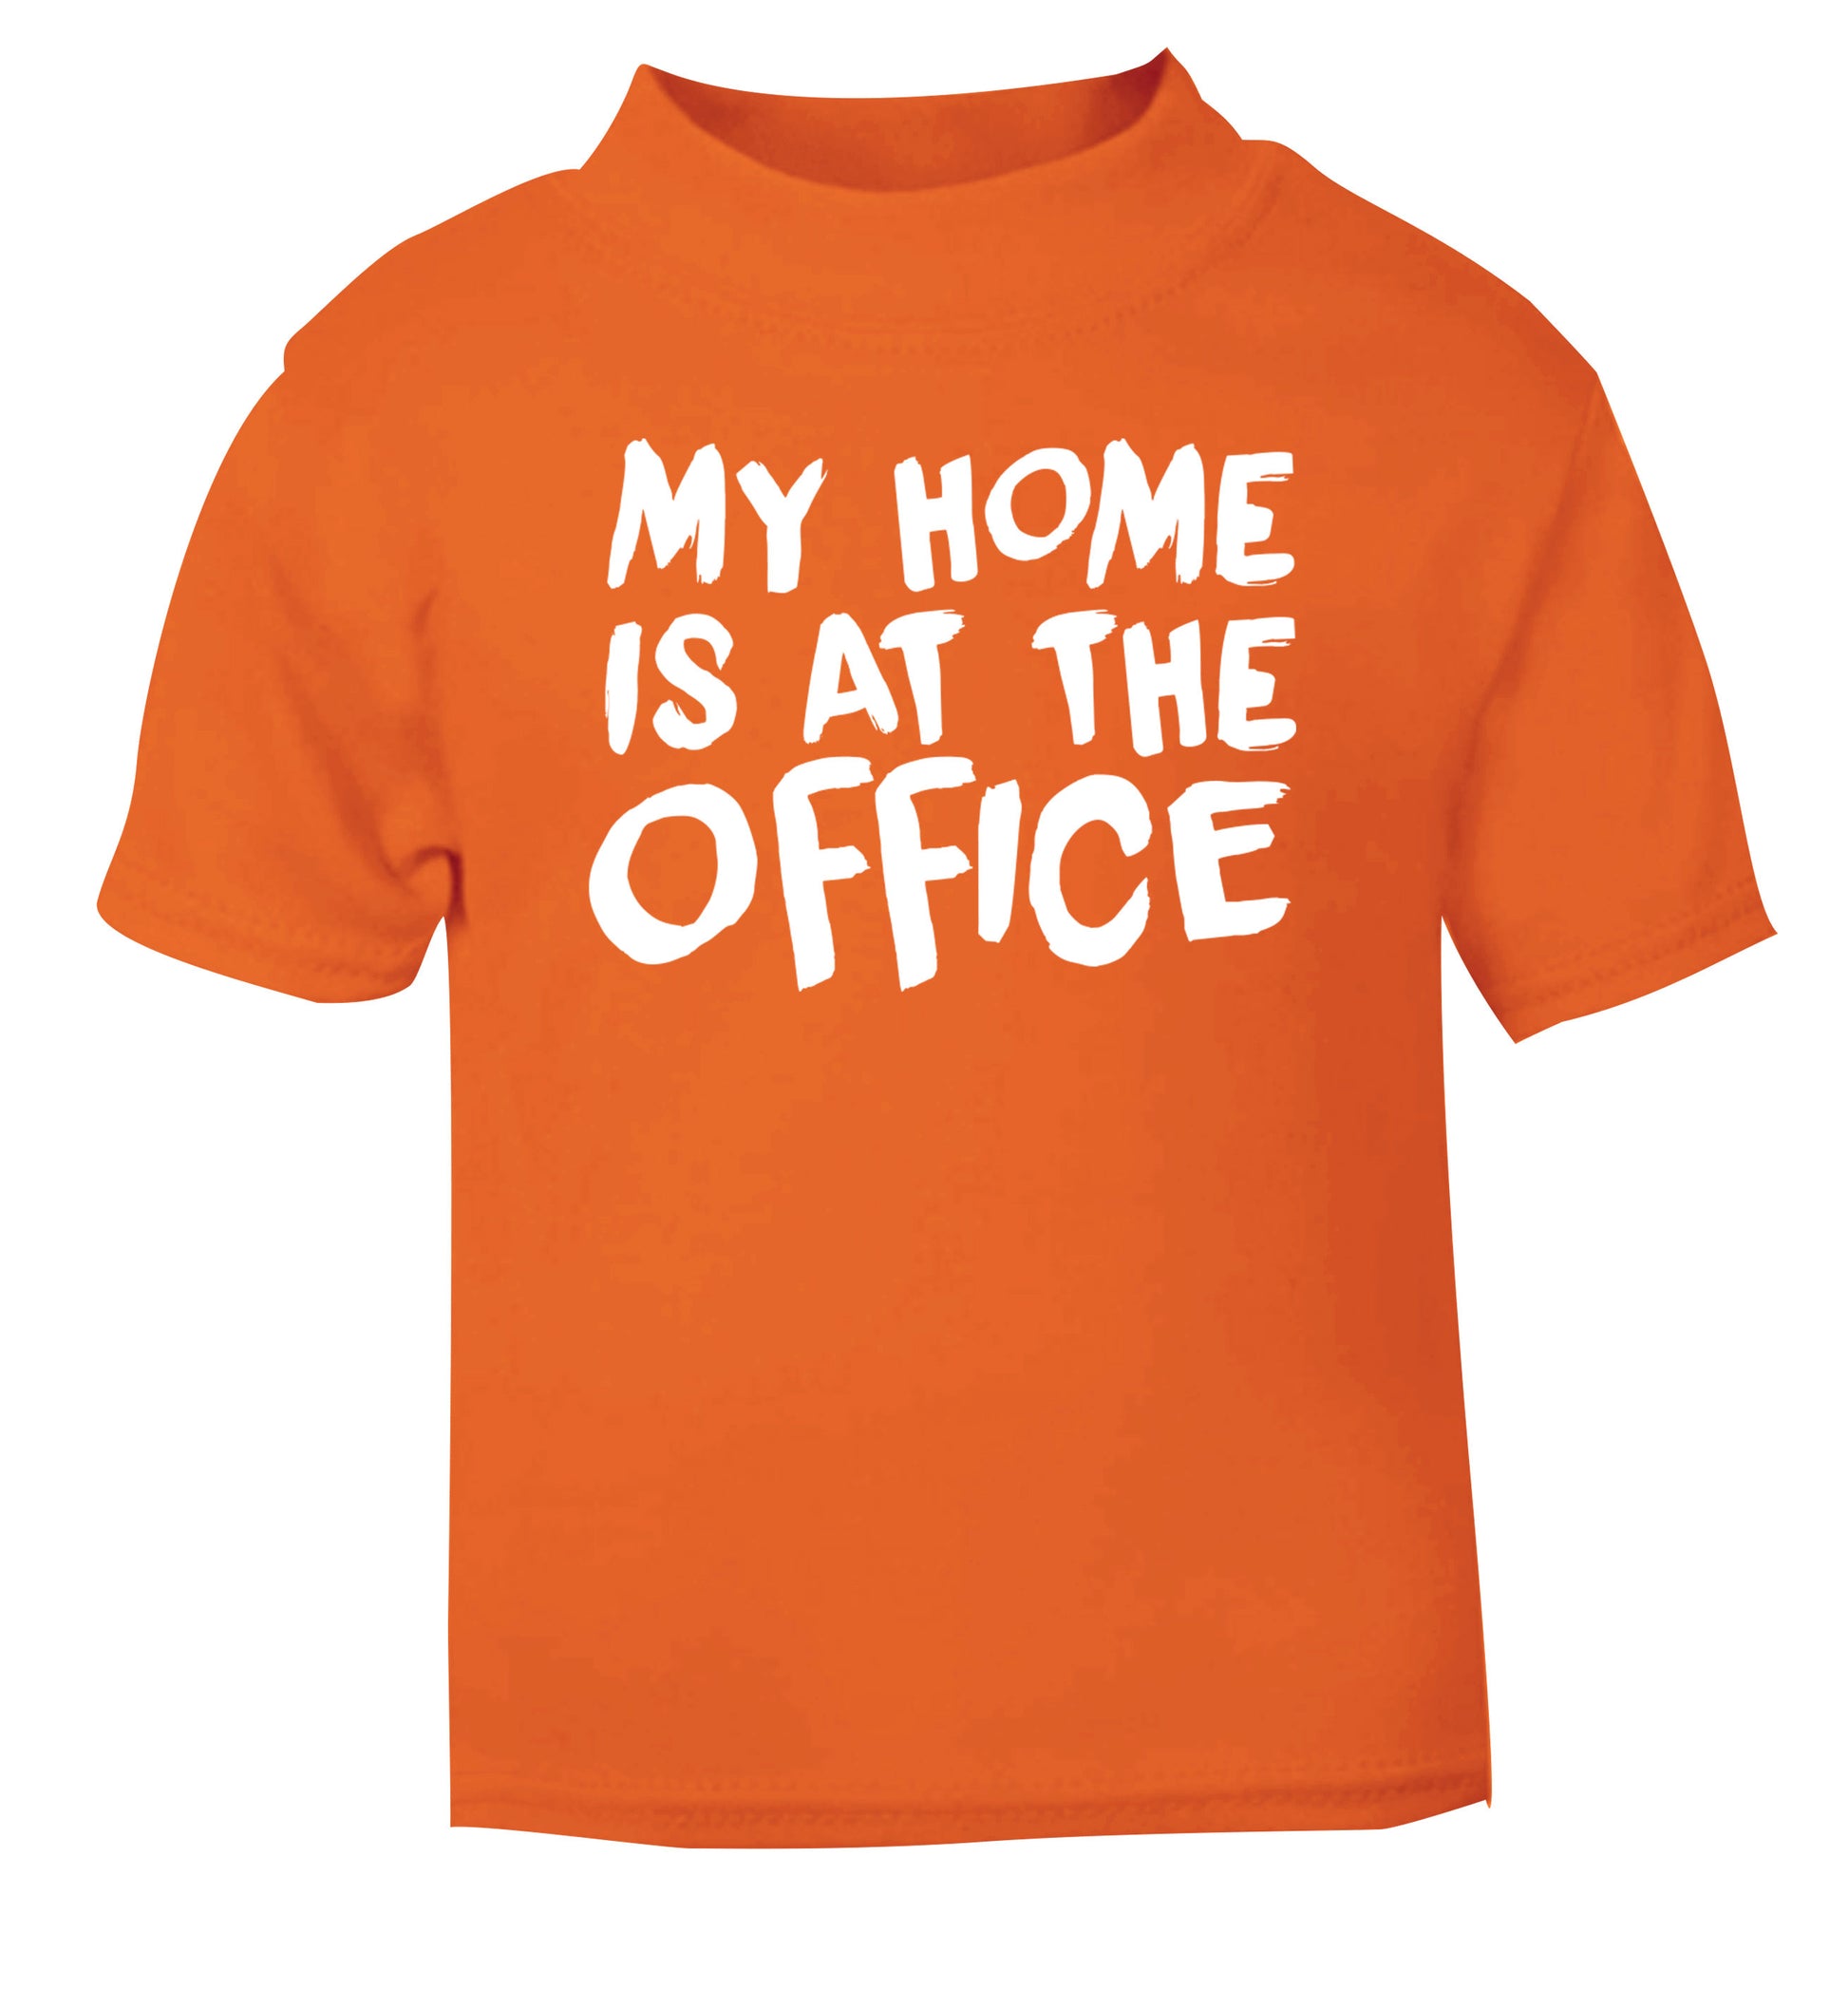 My home is at the office orange Baby Toddler Tshirt 2 Years